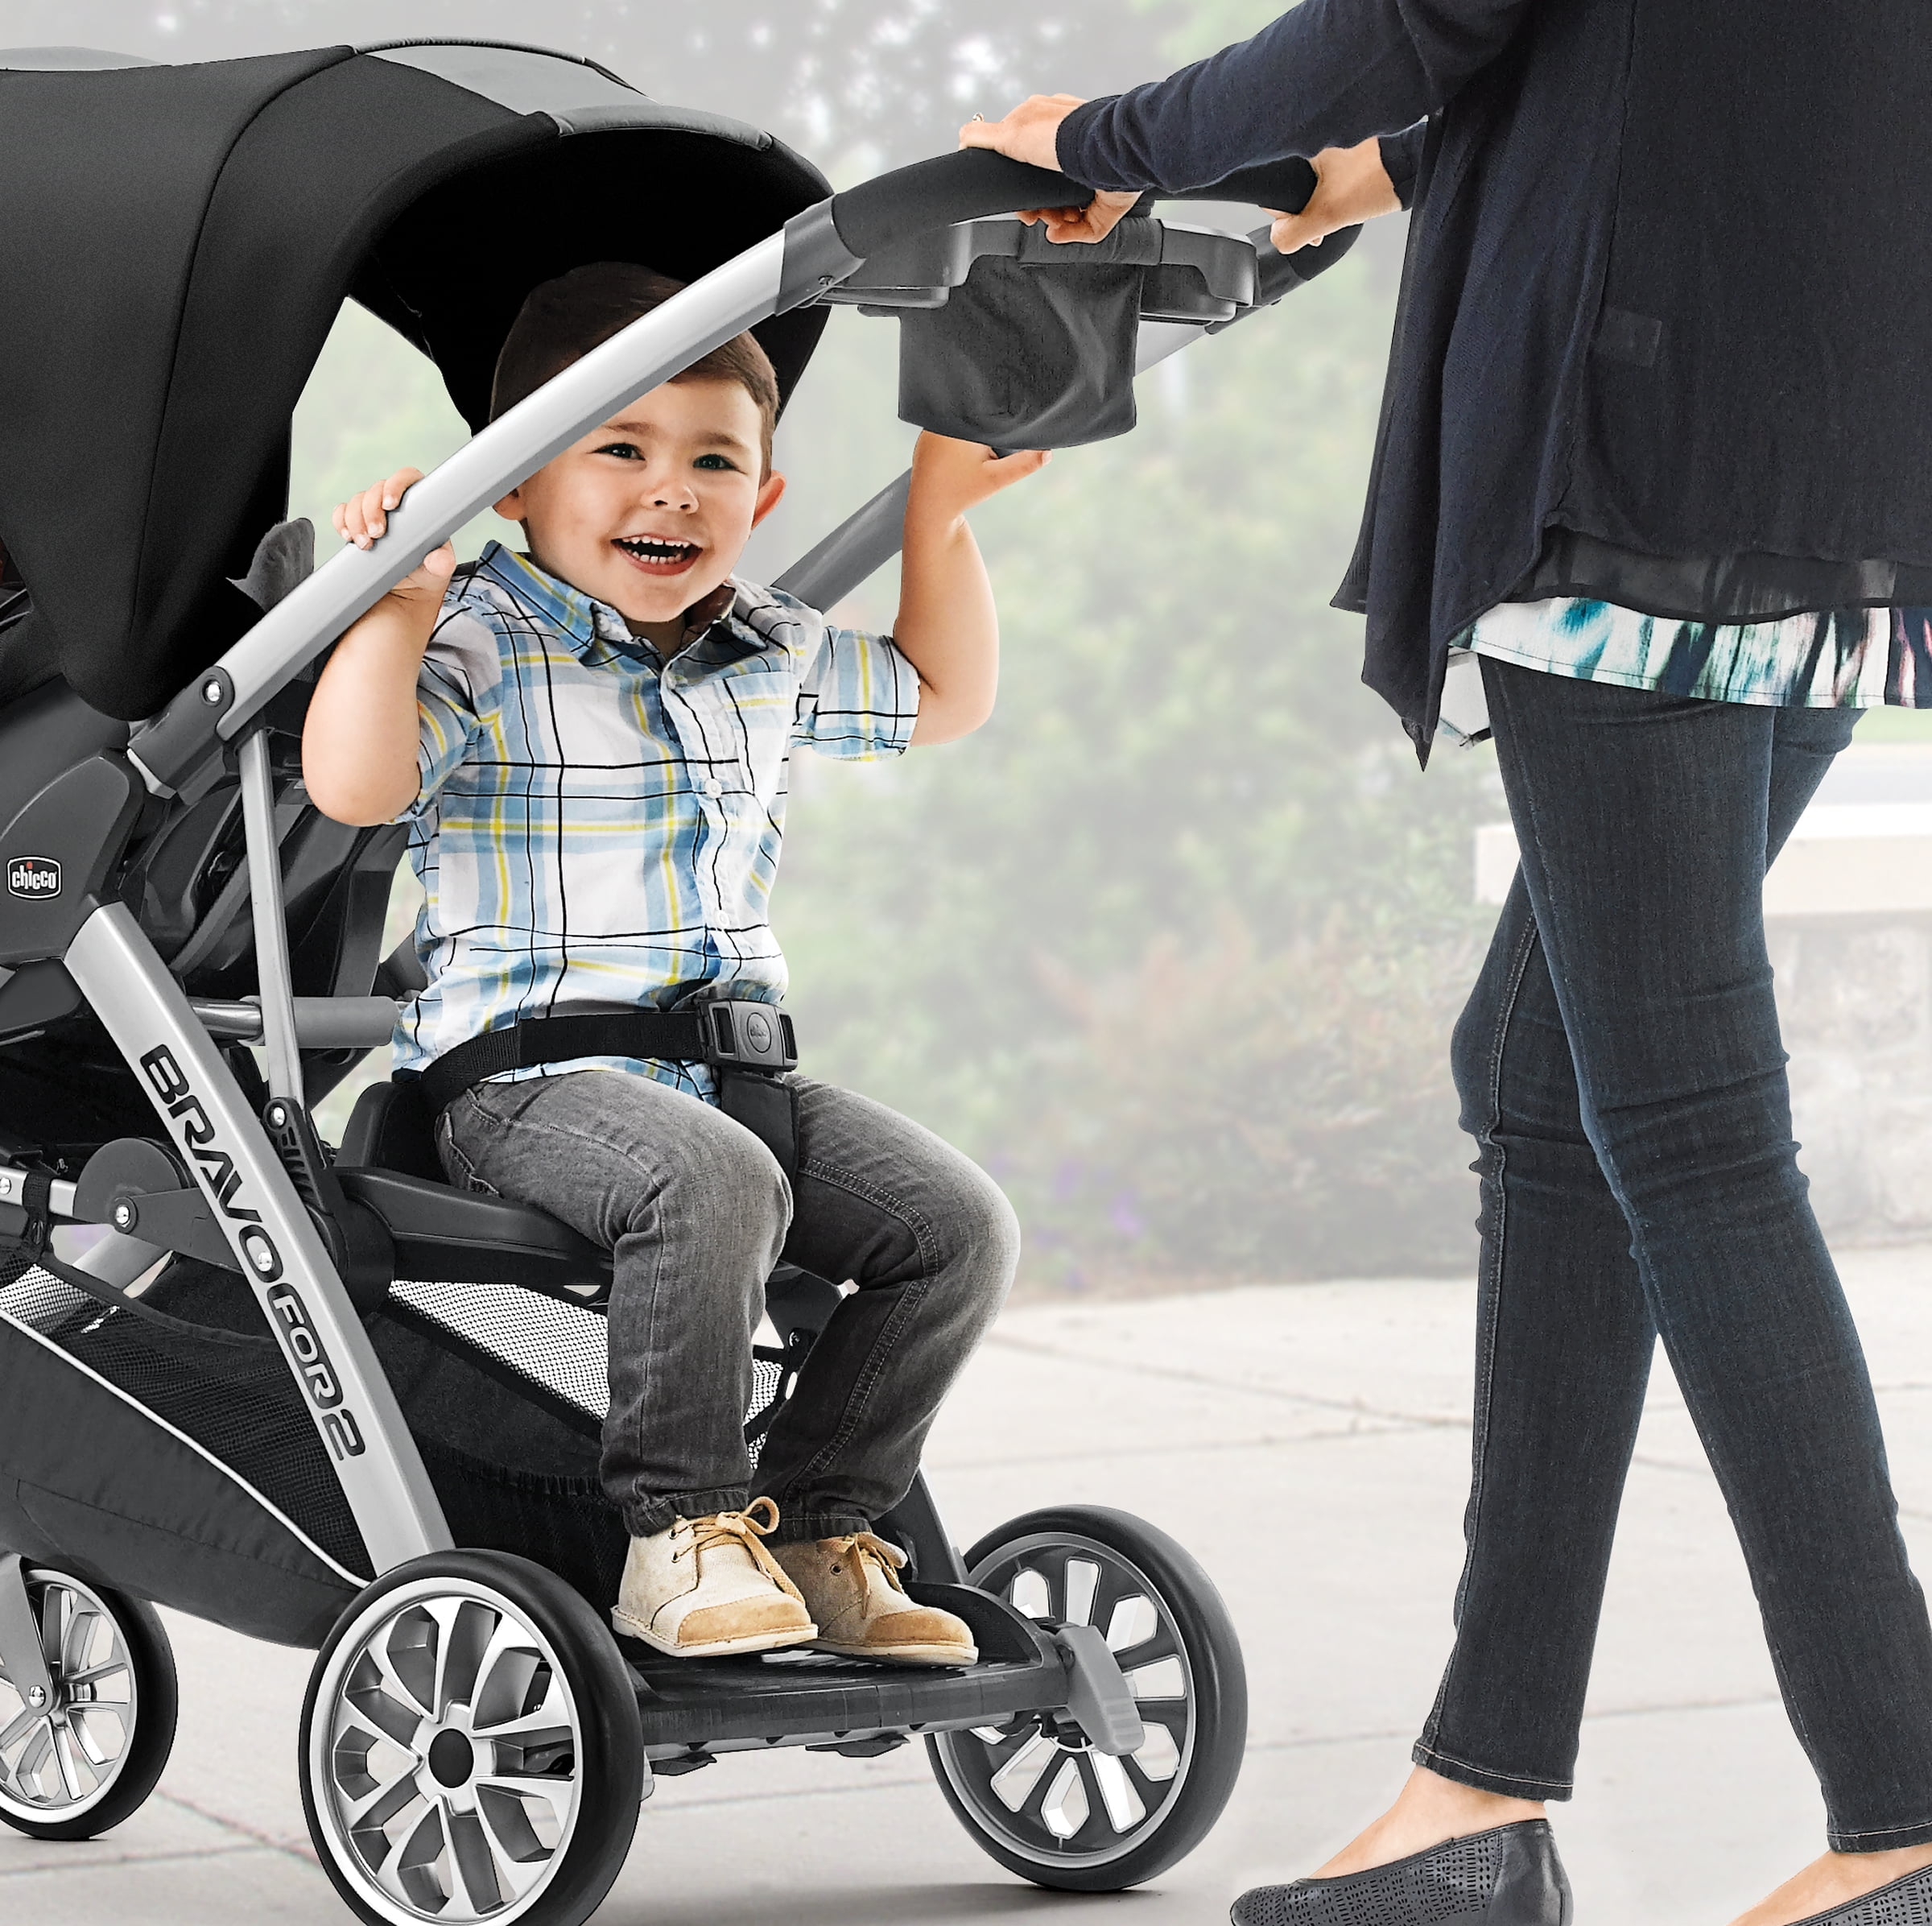 chicco bravo sit and stand stroller